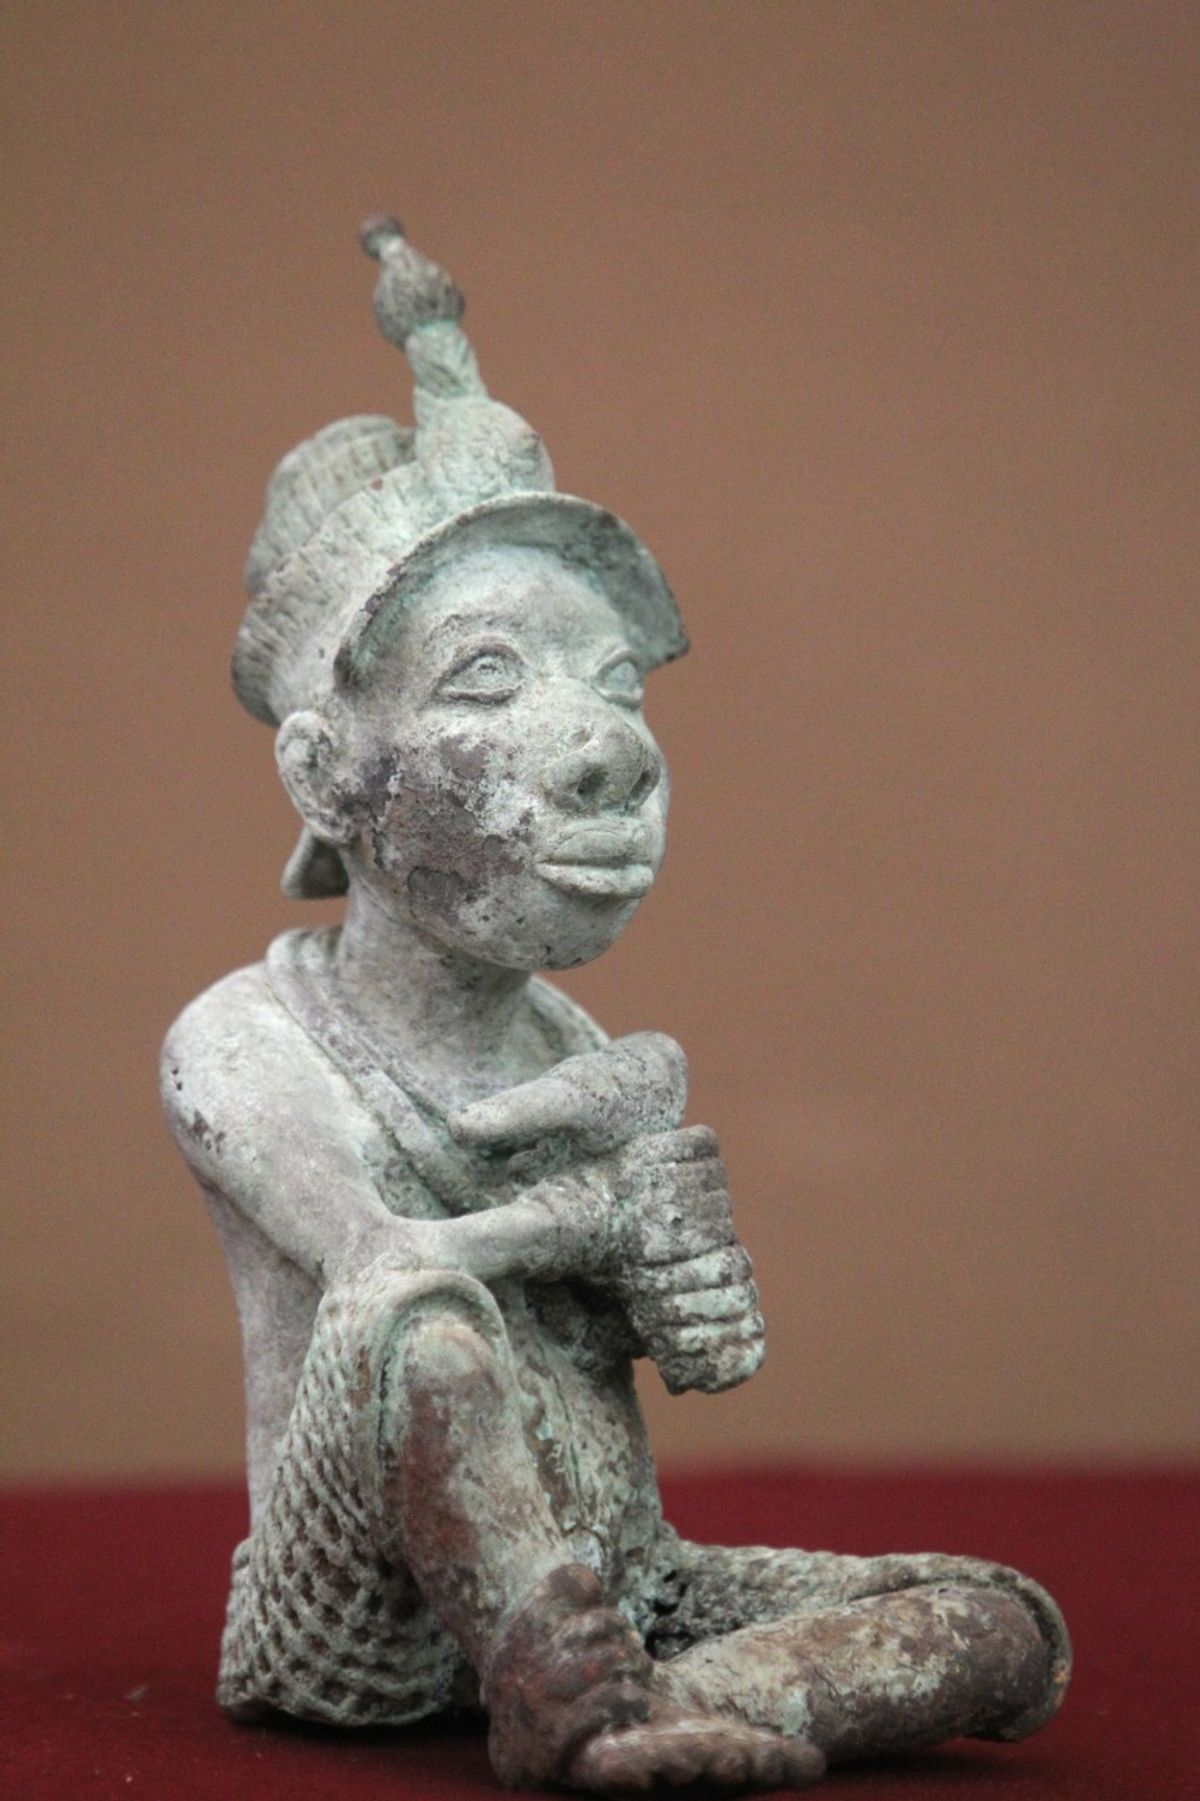 The bronze Ife sculpture that was recently returned from Mexico to Nigeria is believed to be a fake Courtesy of the Mexican ministries of foreign affairs and culture